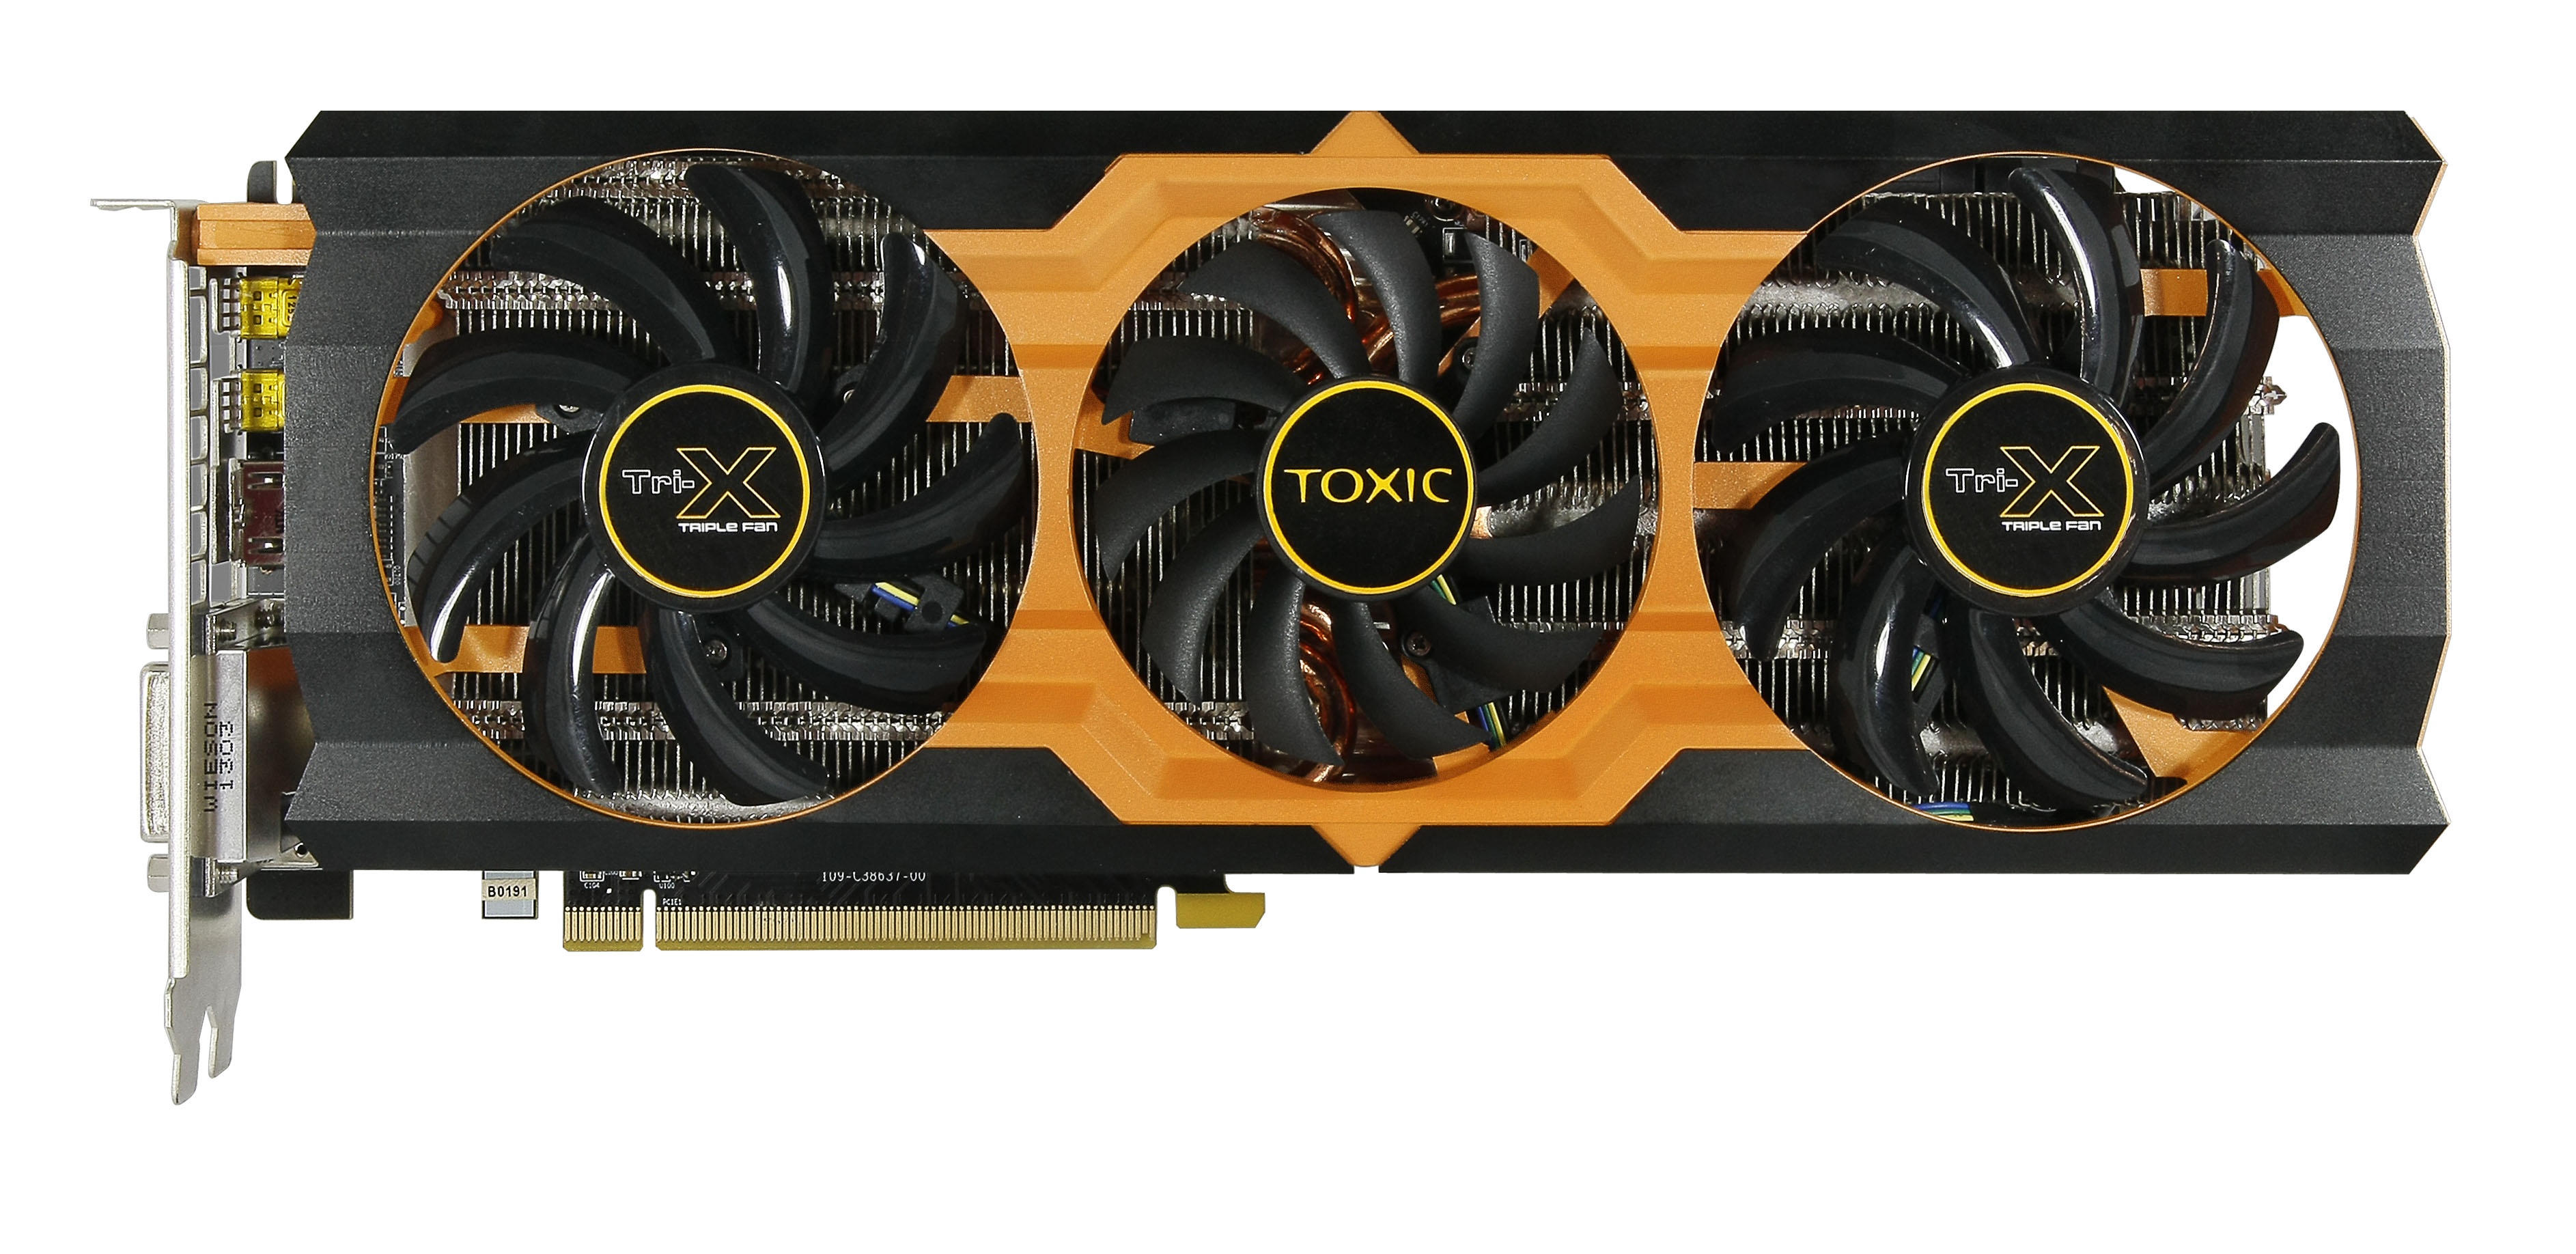 The R9 280X Toxic Review